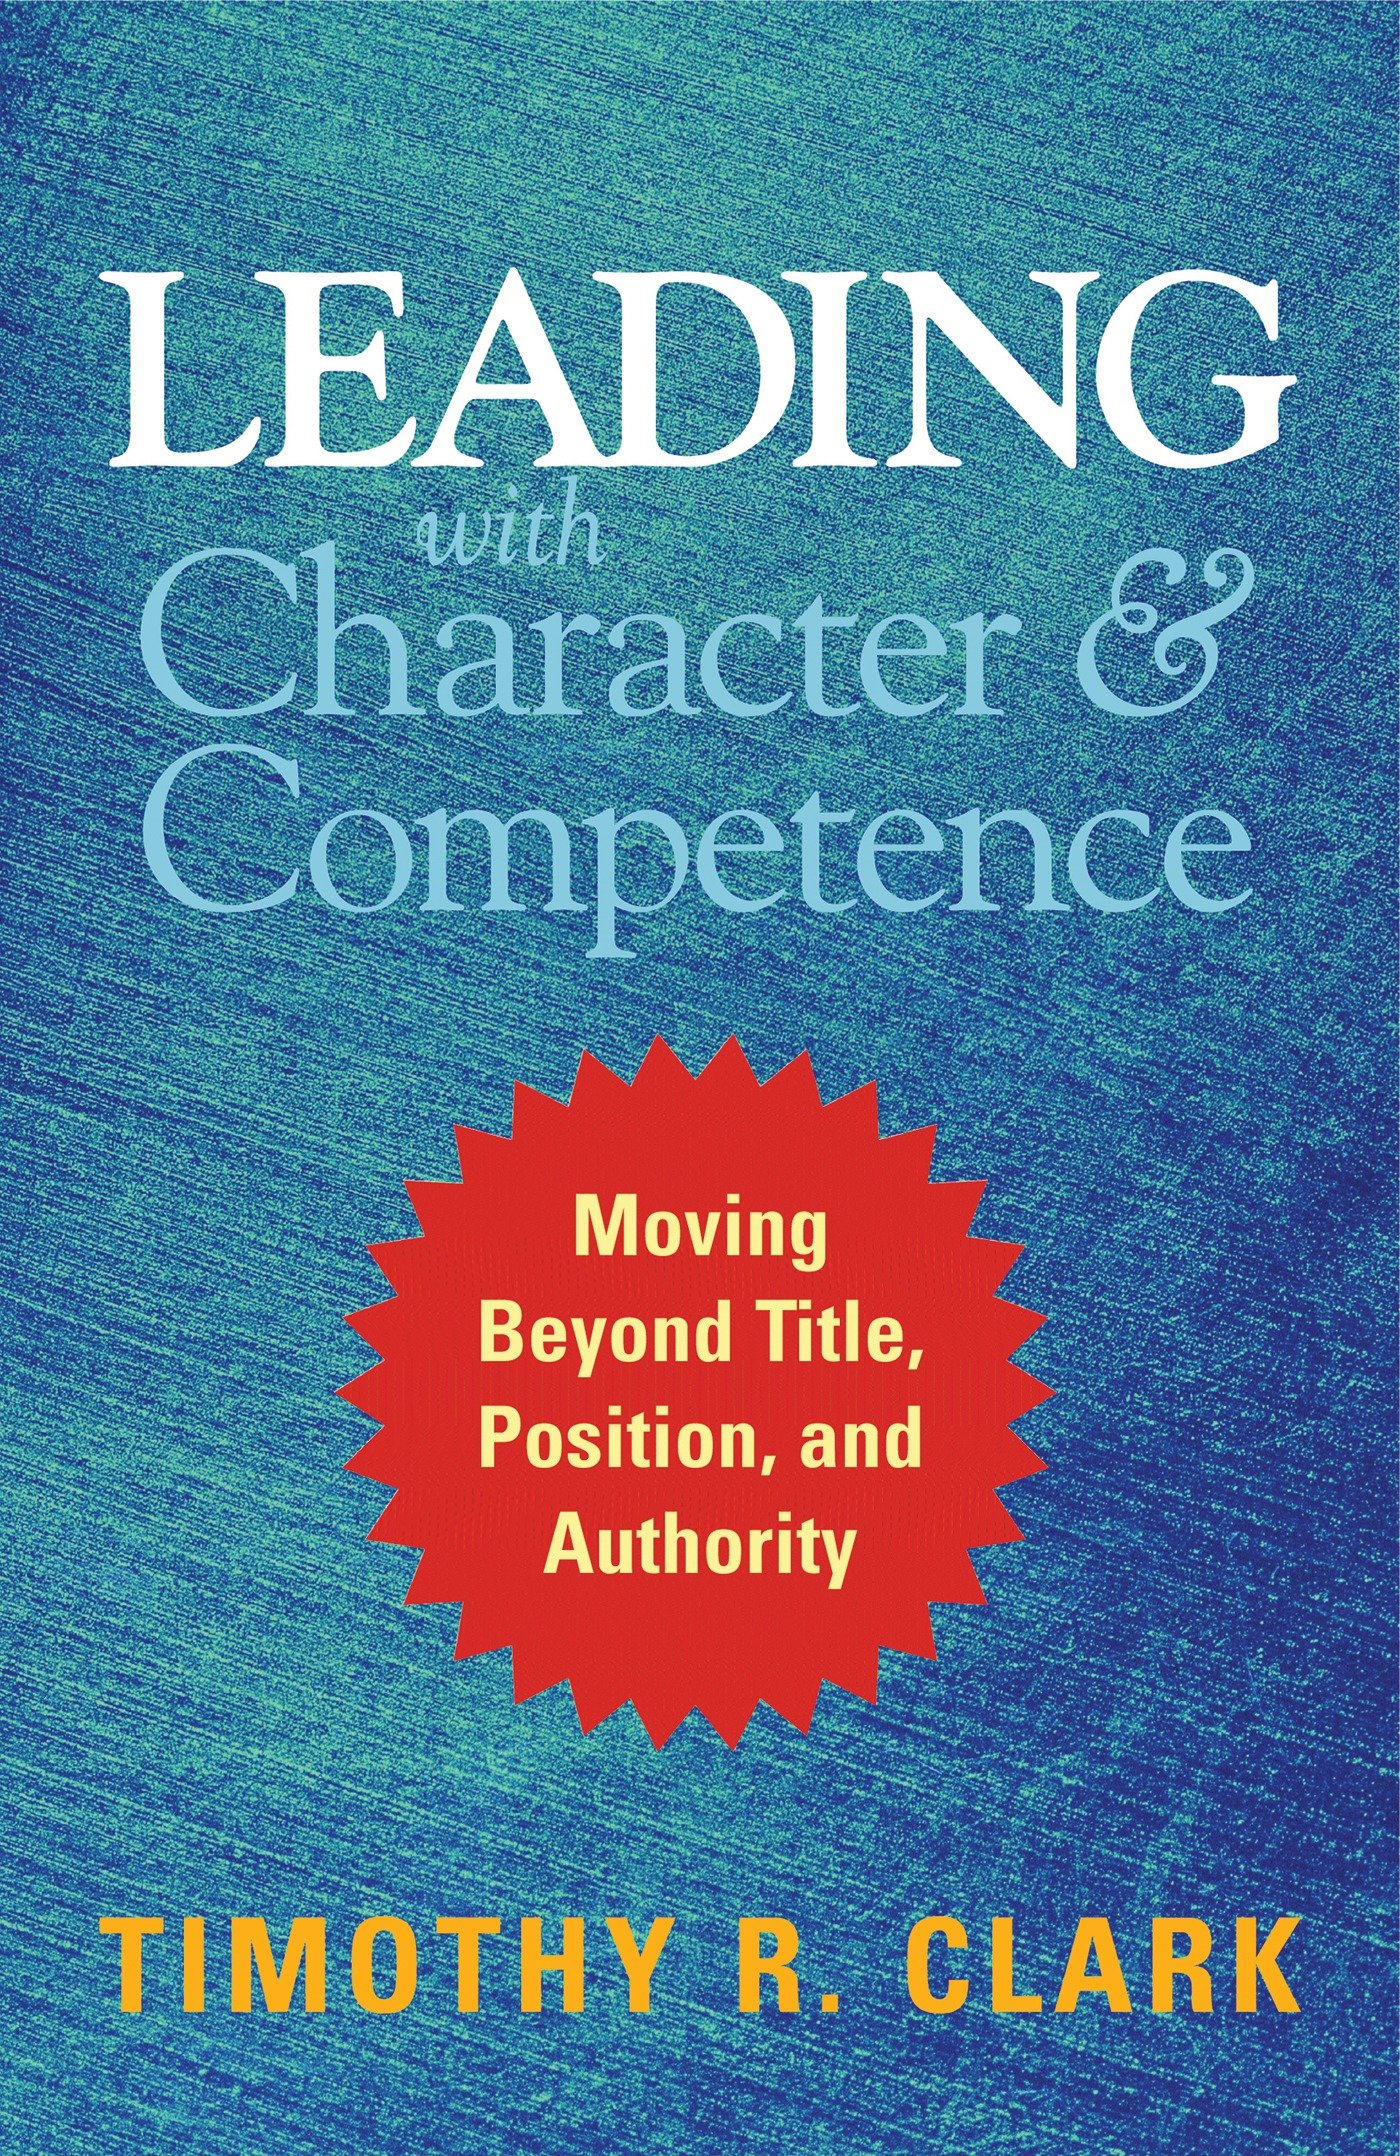 Leading With Character And Competence (Hardcover Book)